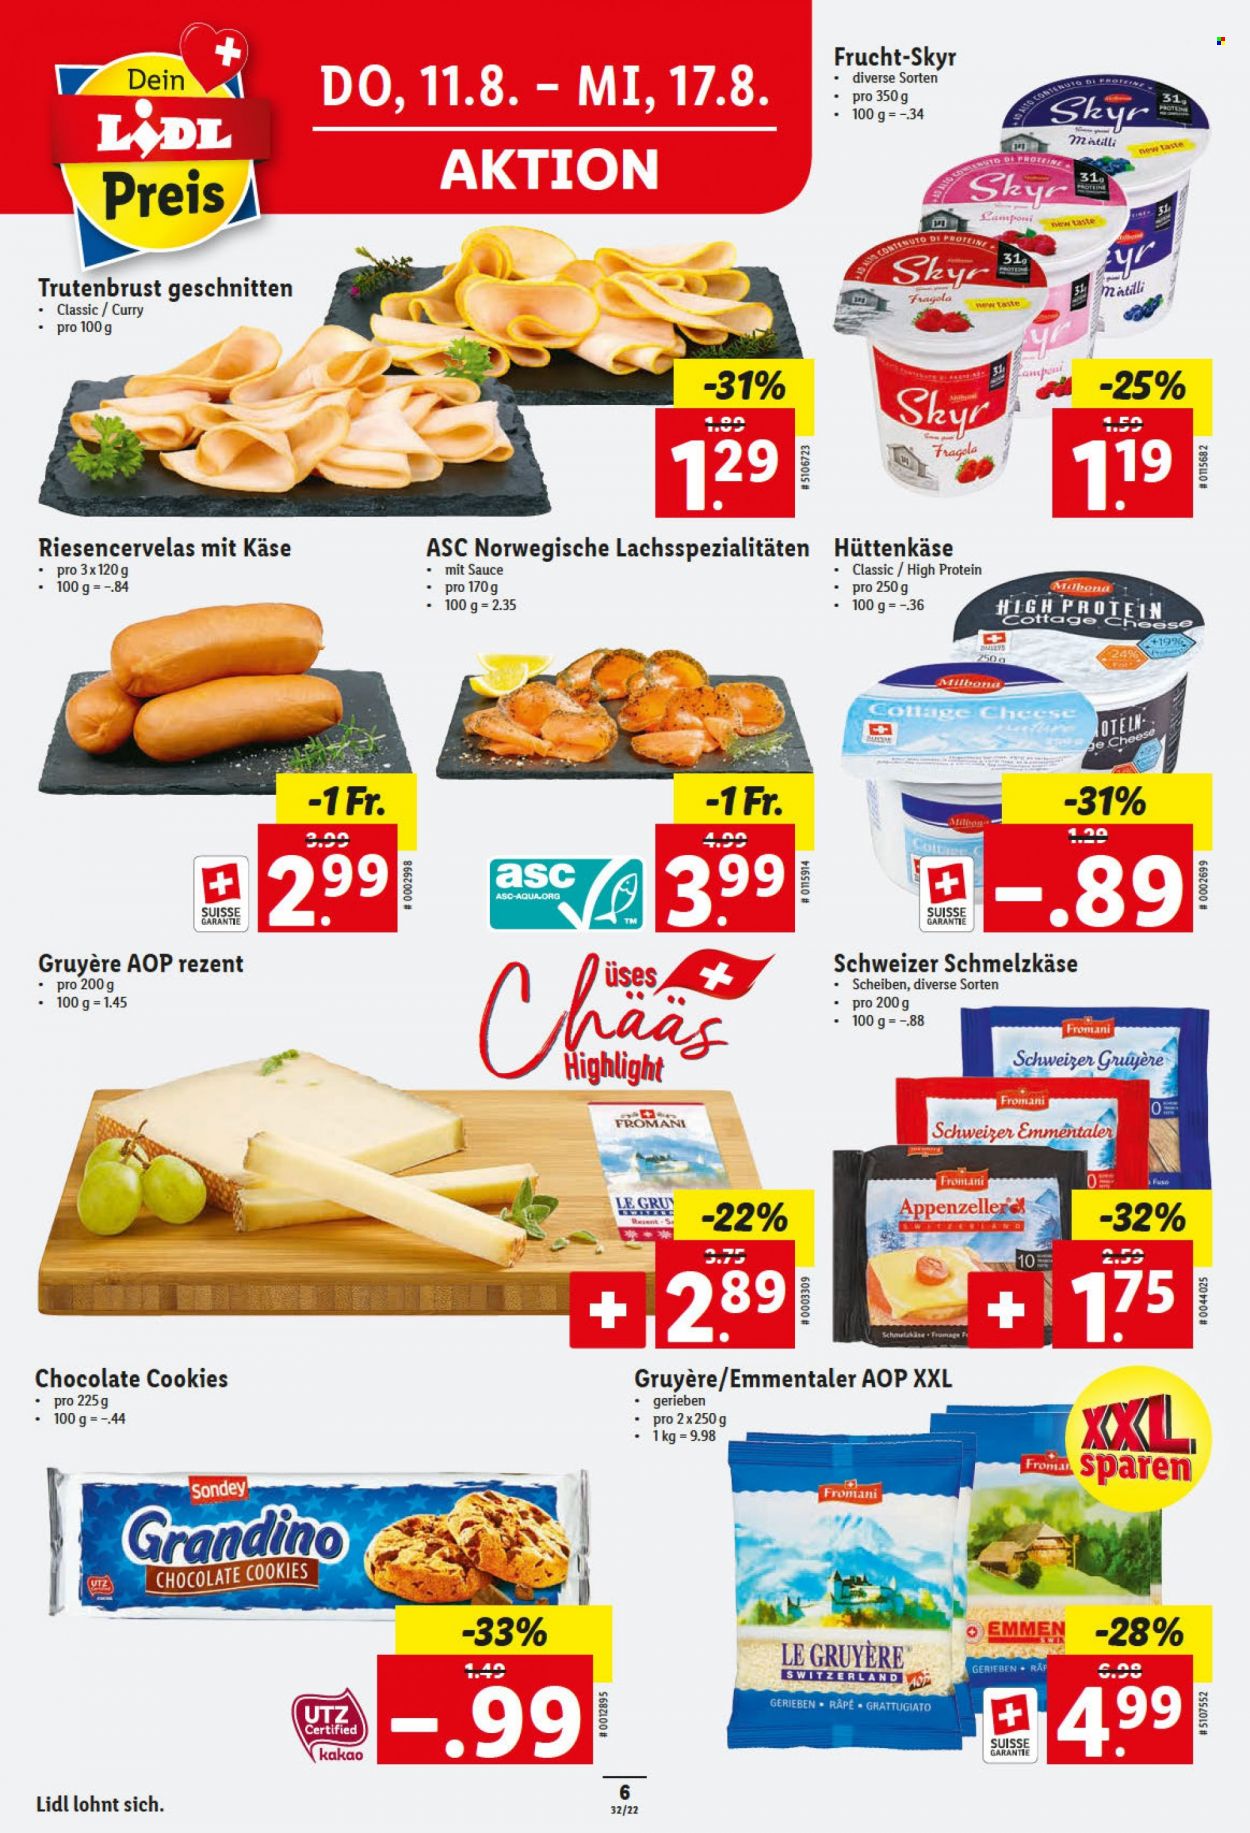 Catalogue Lidl - 11.8.2022 - 17.8.2022. Page 6.